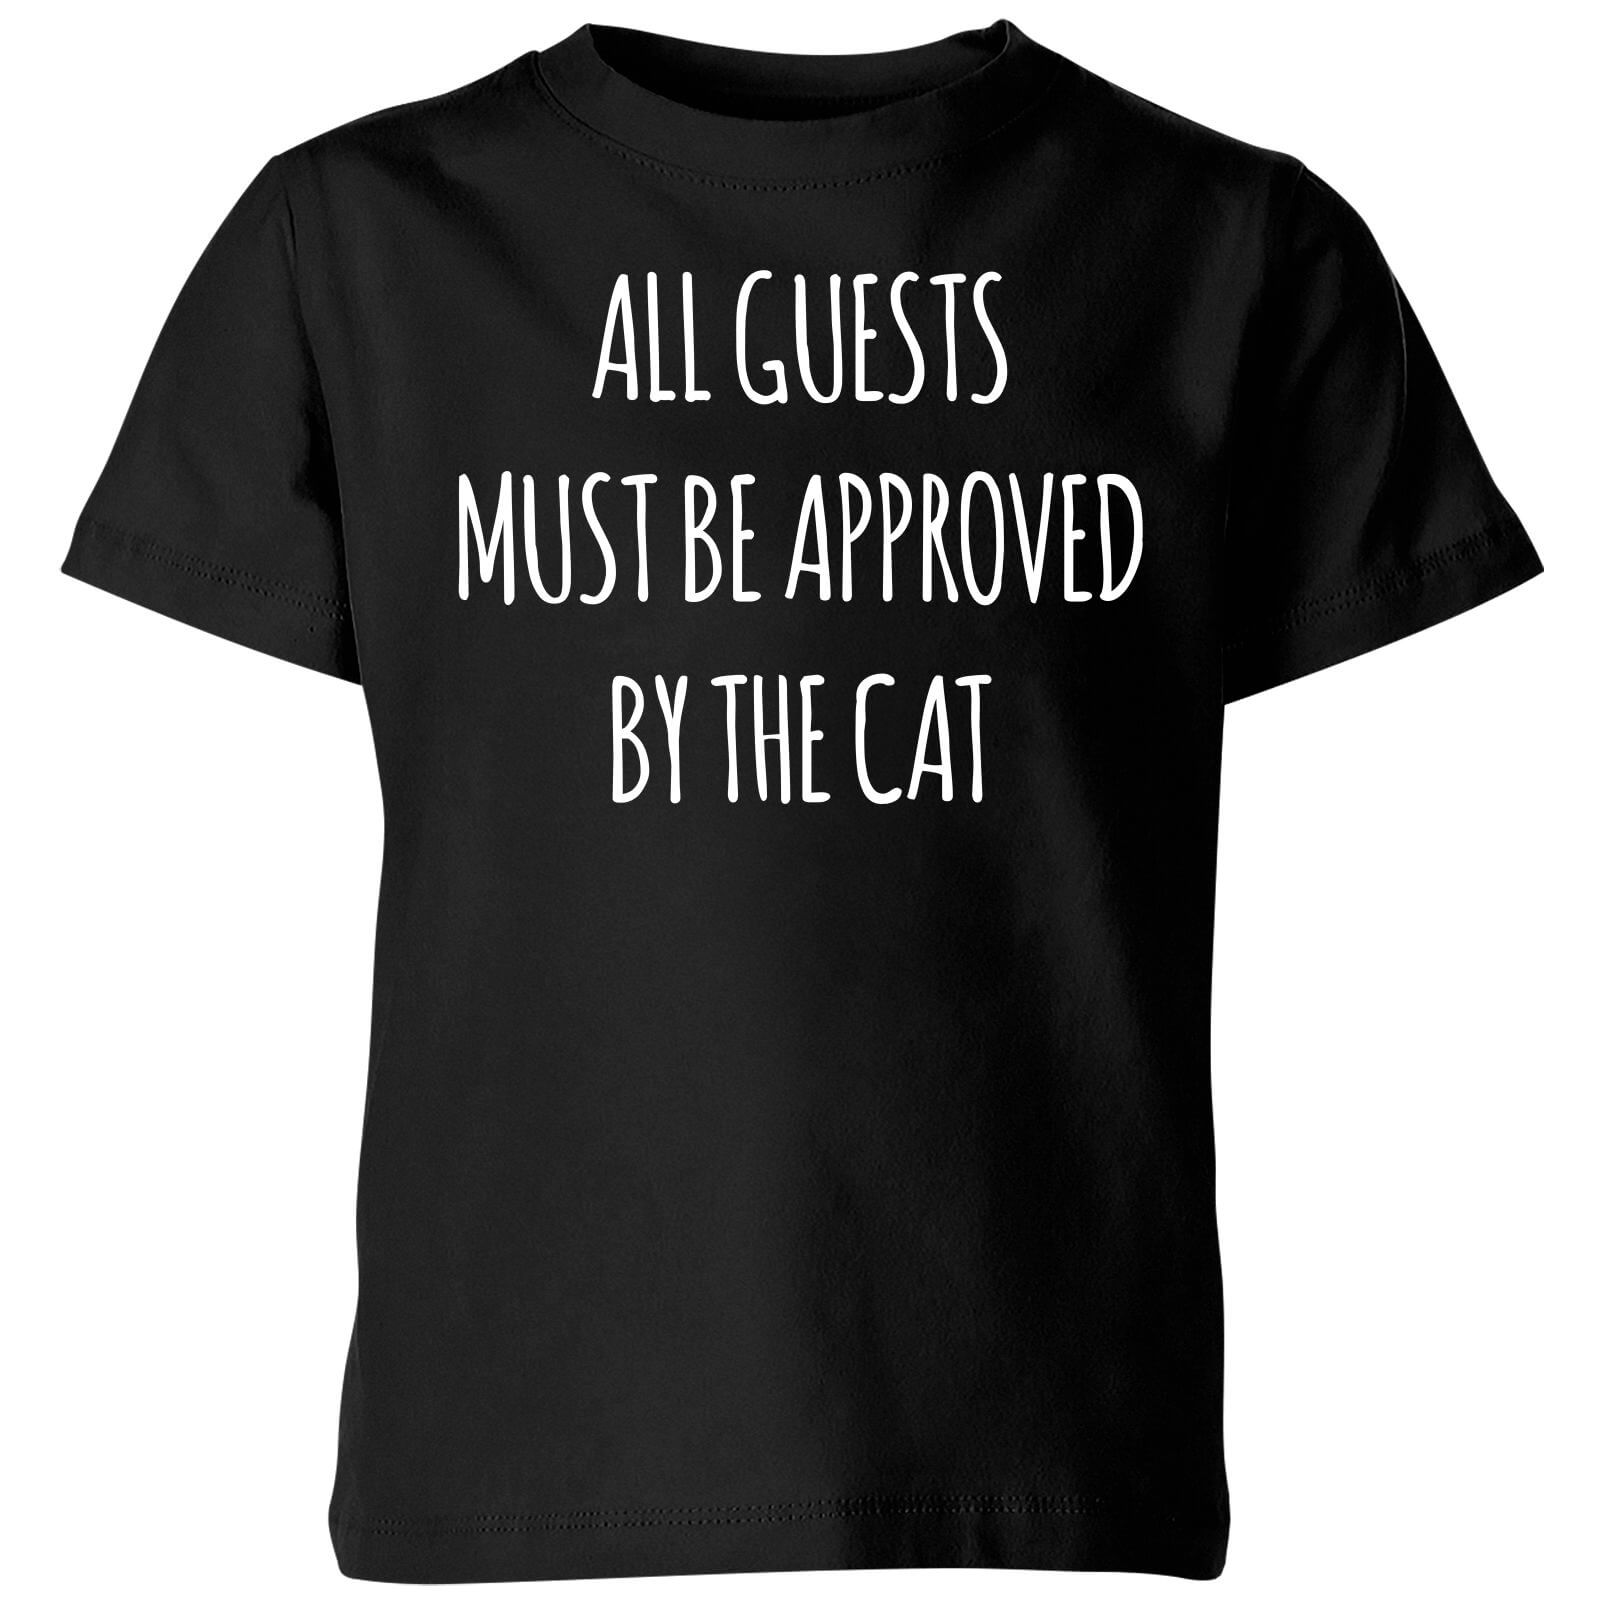 All Guests Must Be Approved By The Cat Kids' T-Shirt - Black - 3-4 Years - Black